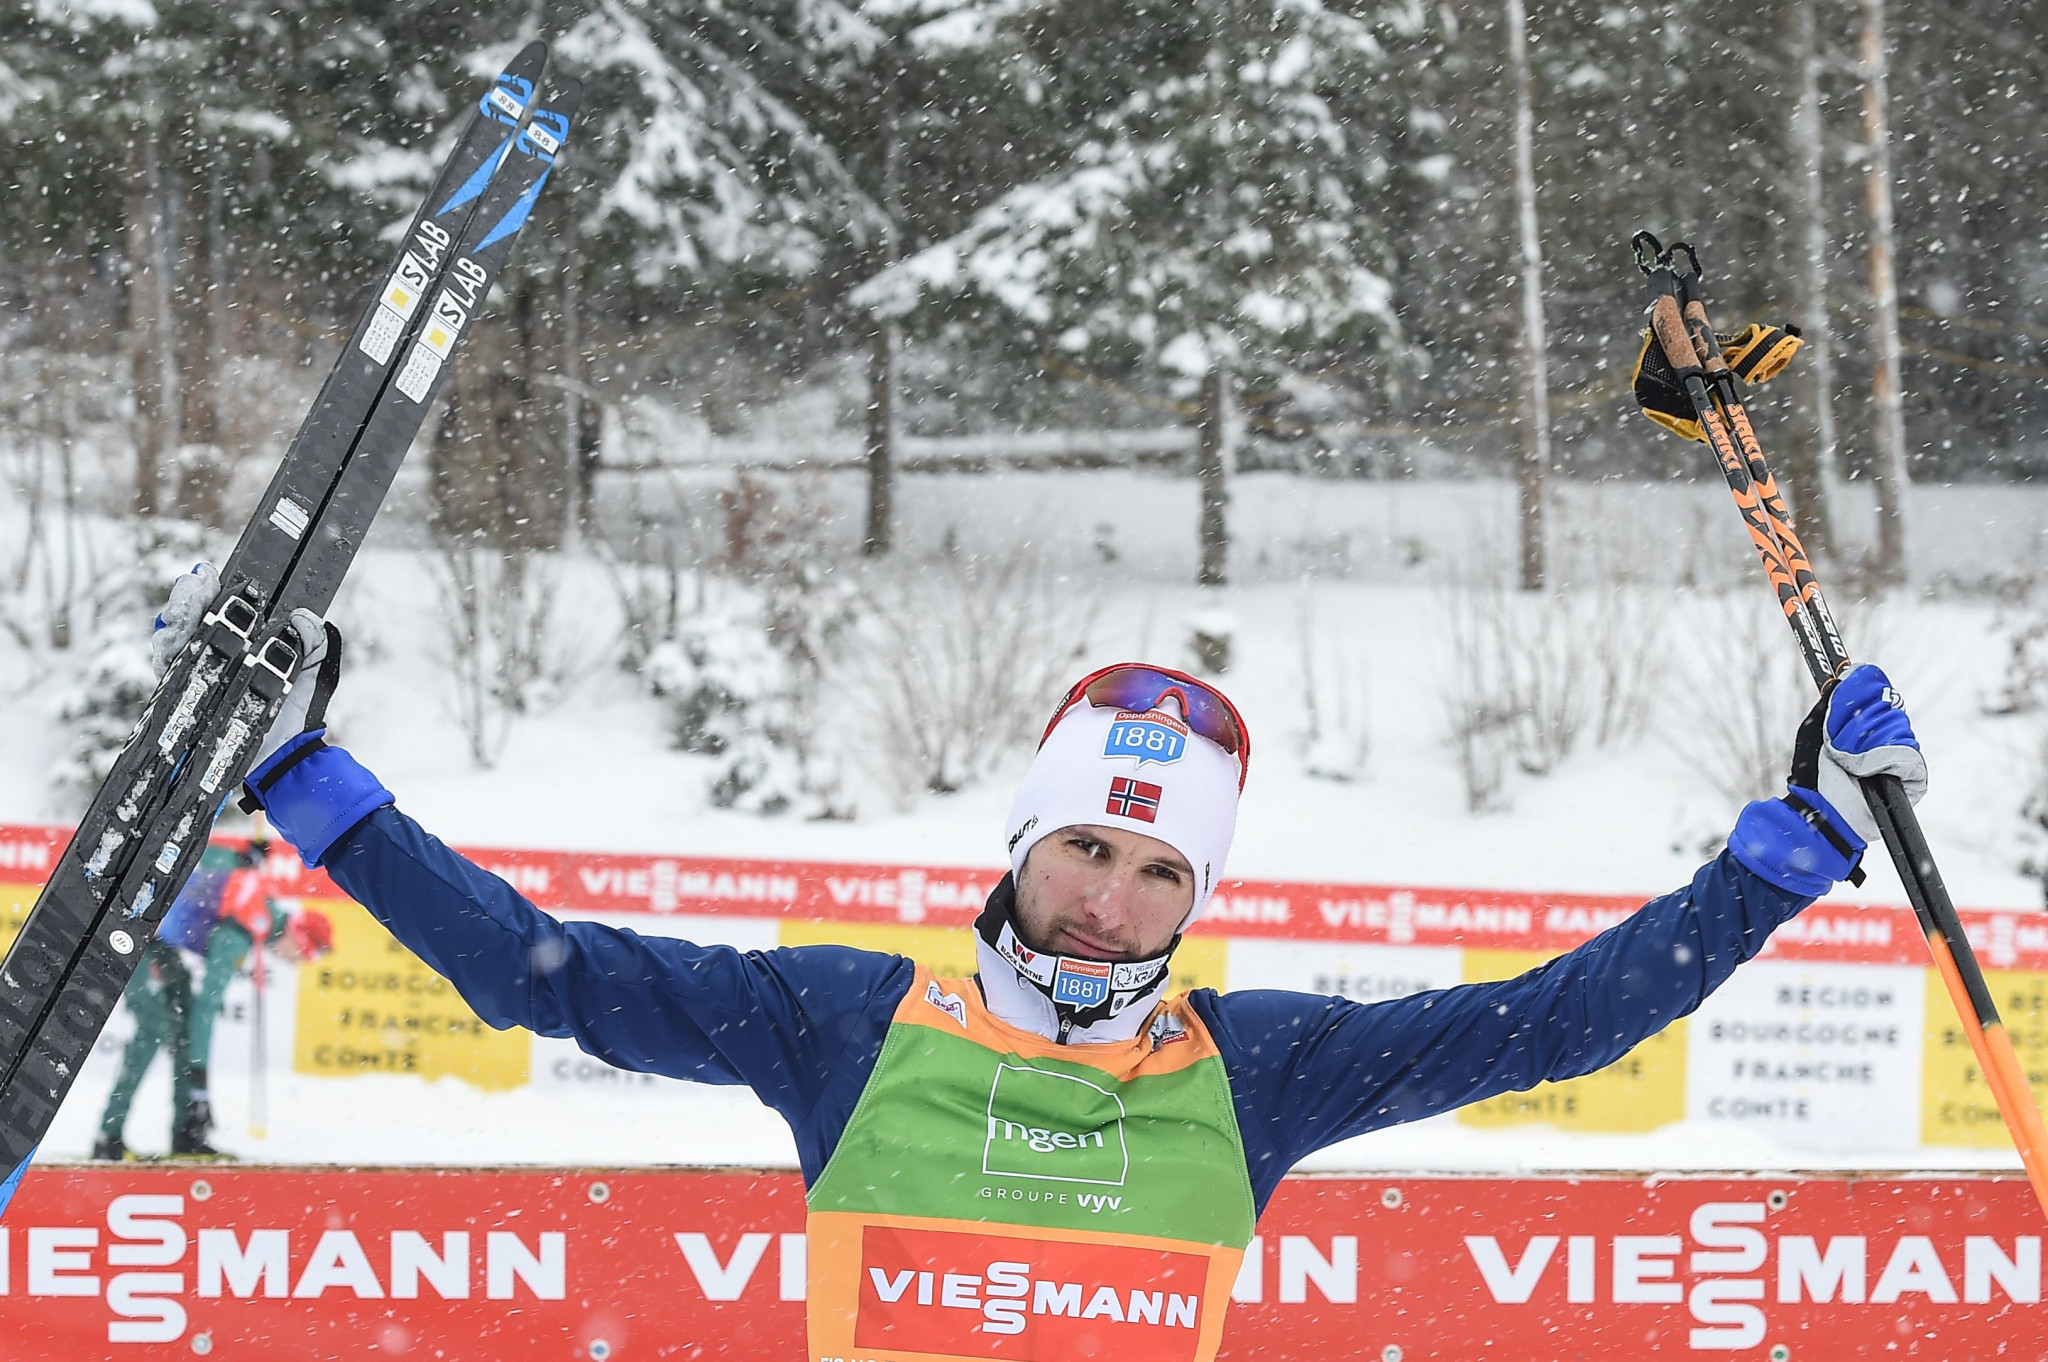 Schmid shows nerve in the blizzard to win fourth FIS Nordic Combined World Cup 